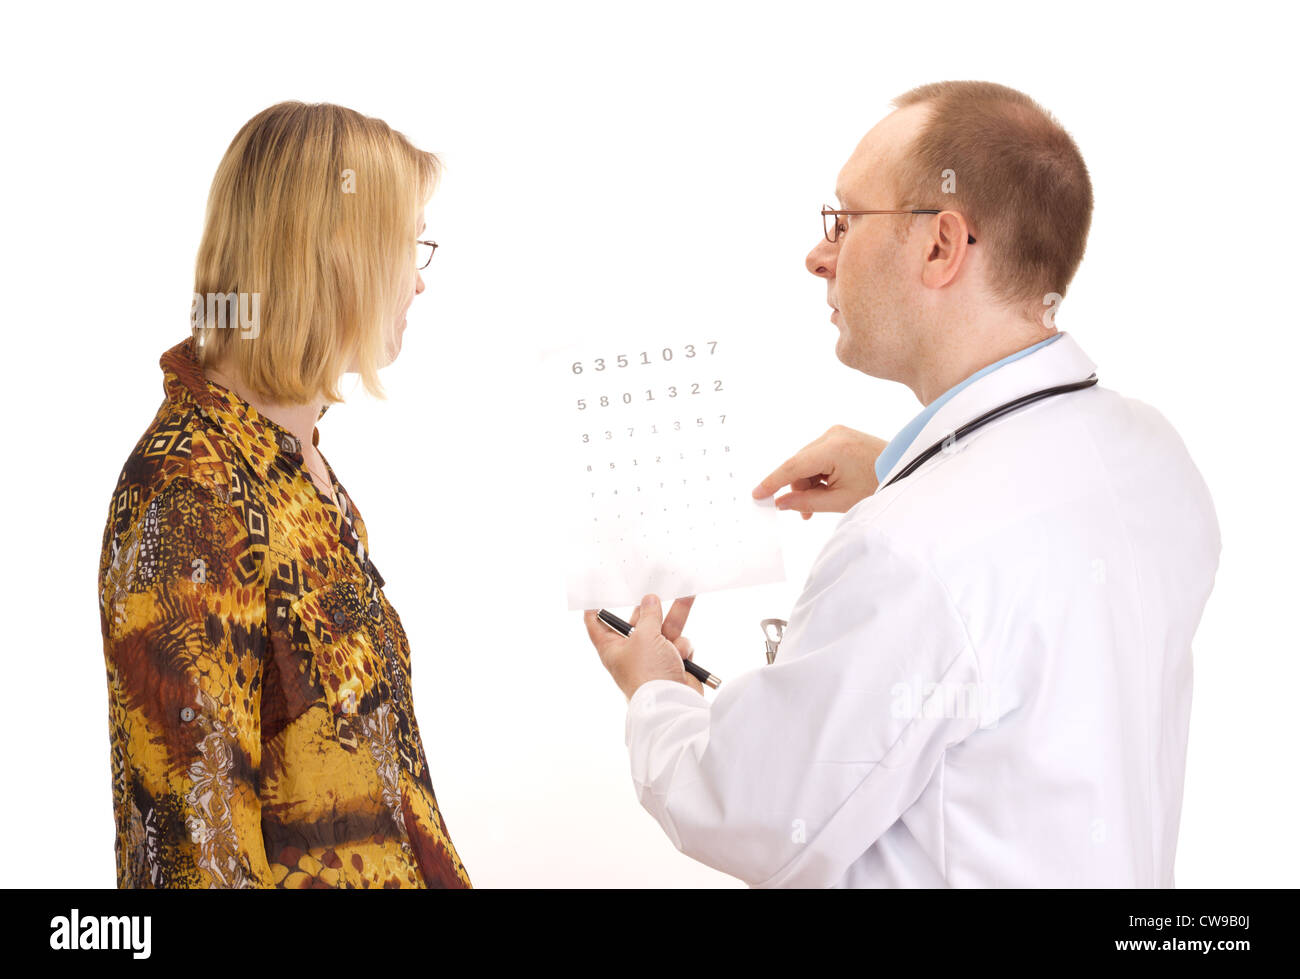 Patient by an ophthalmologist Stock Photo